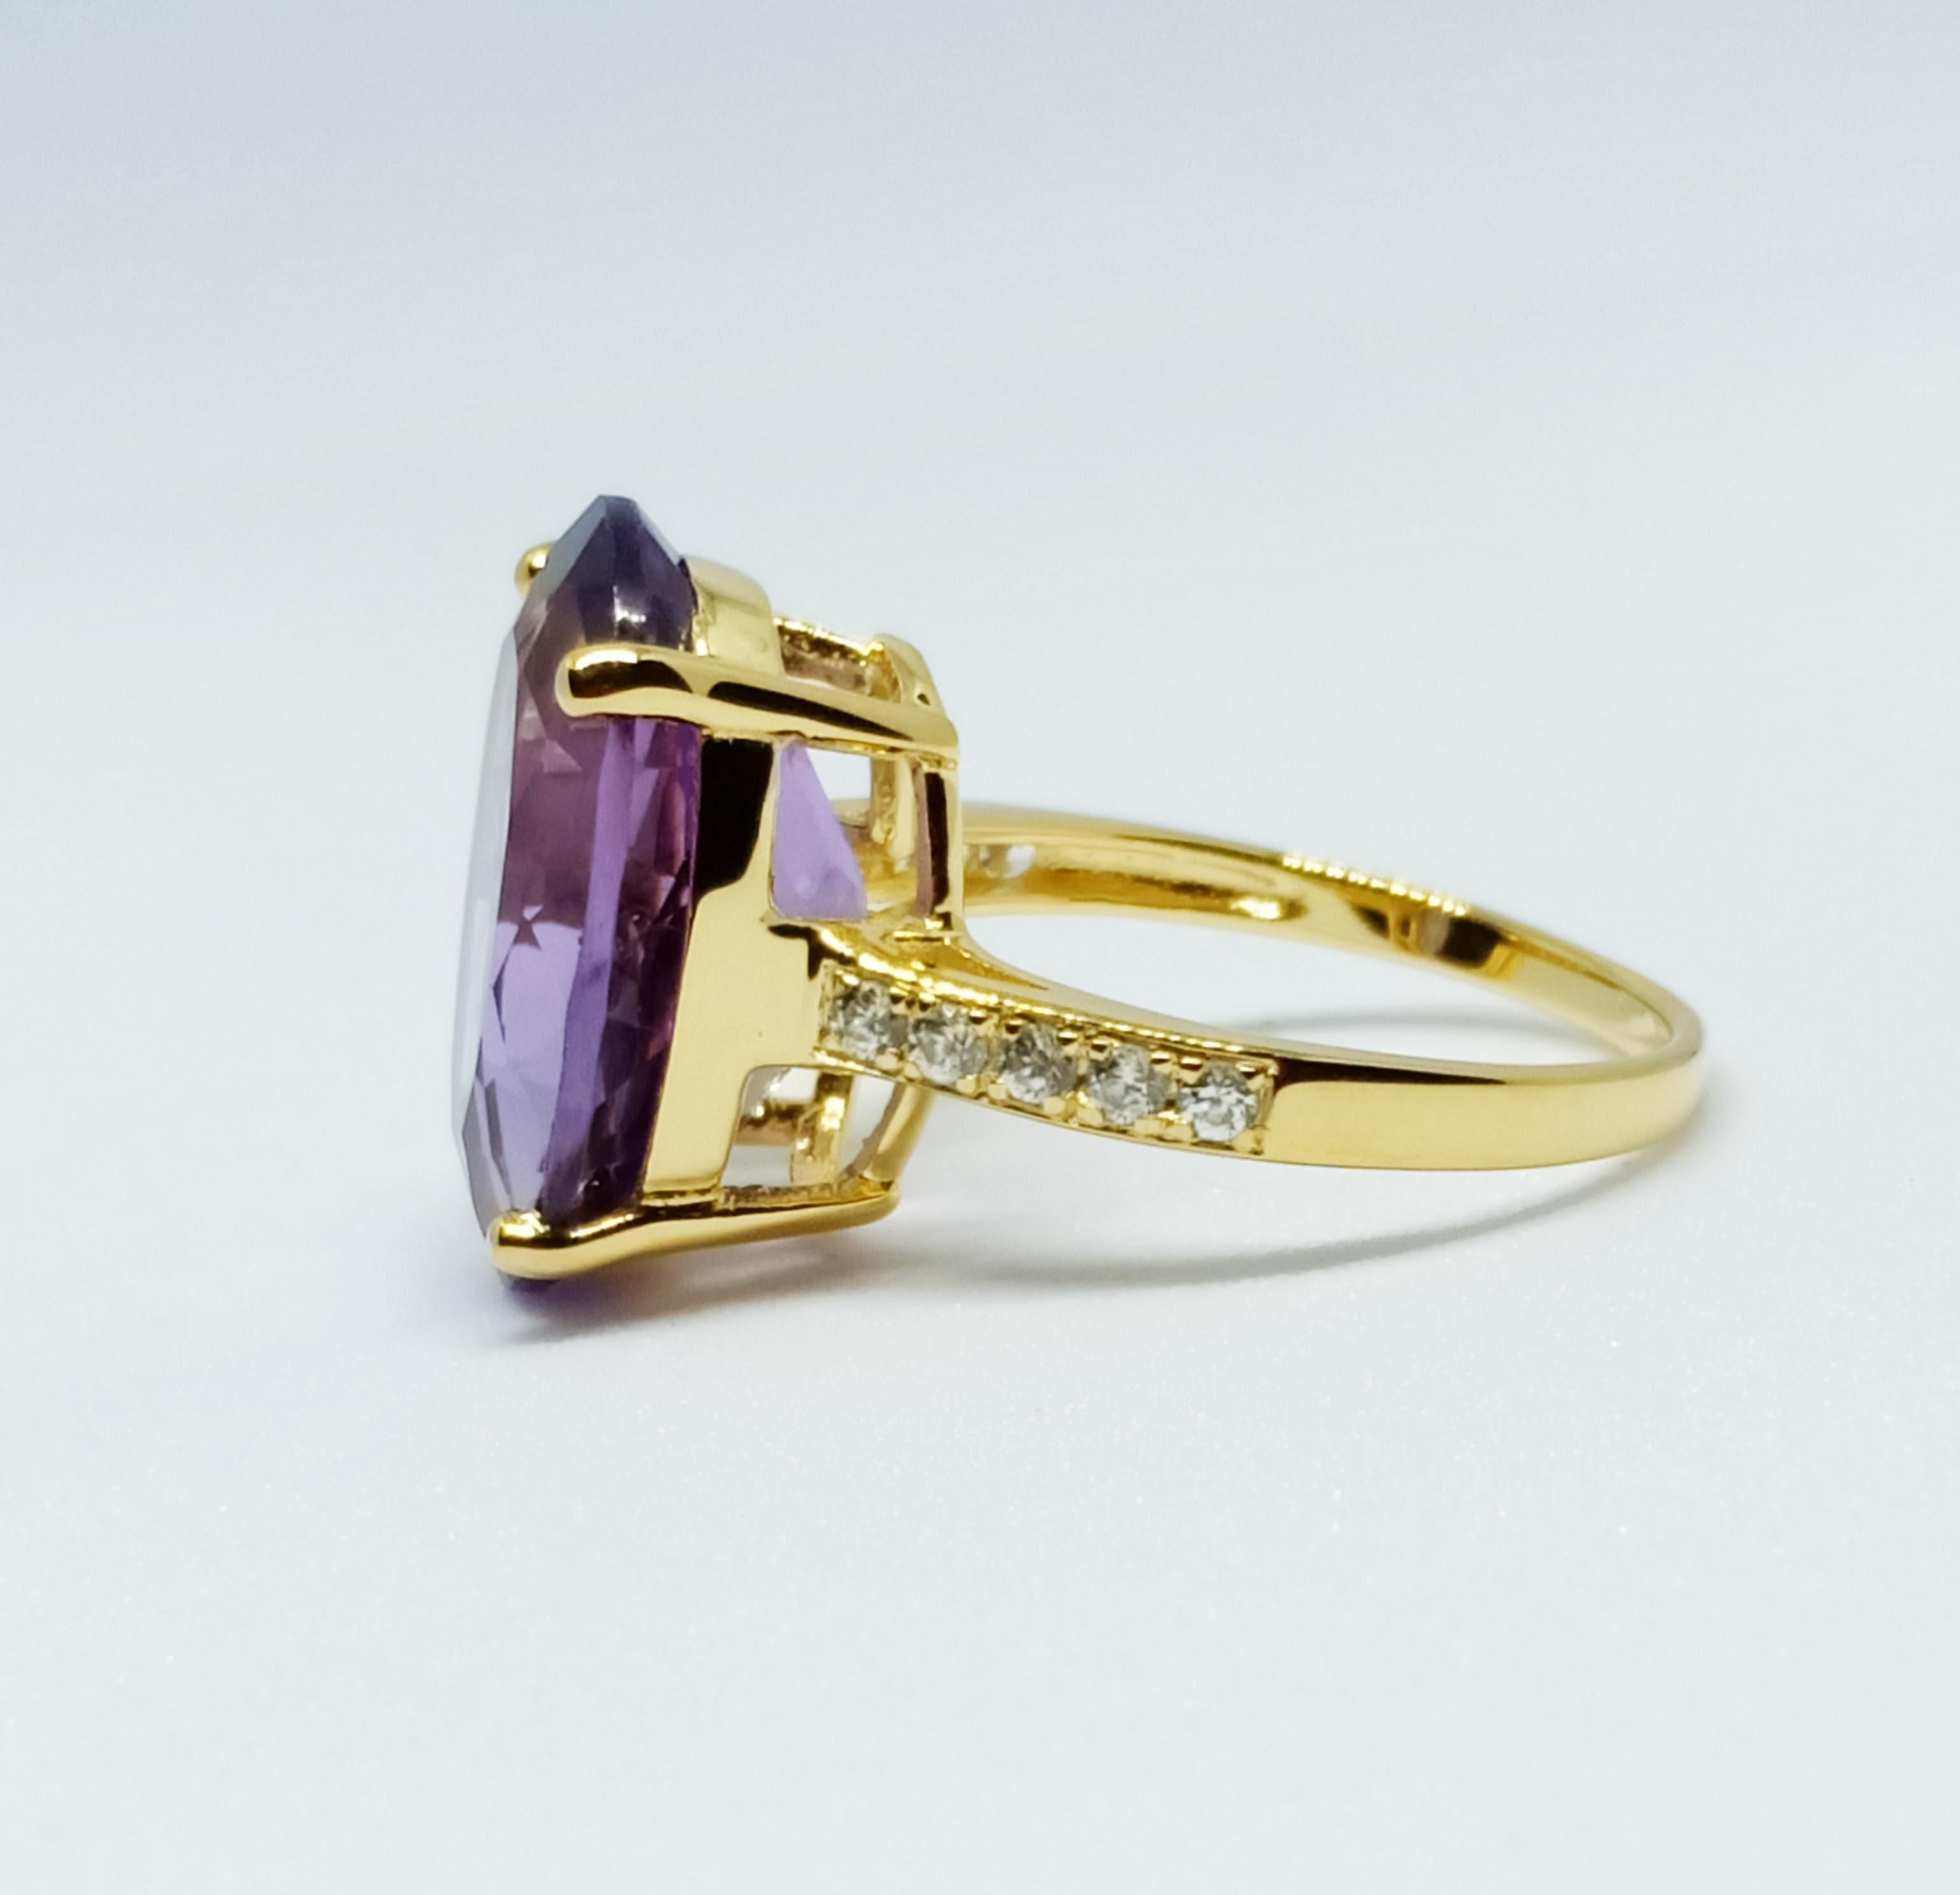 Oval Cut Amethyst ring ( 11.24cts )  white zircon 18kGold plated over sterling silver